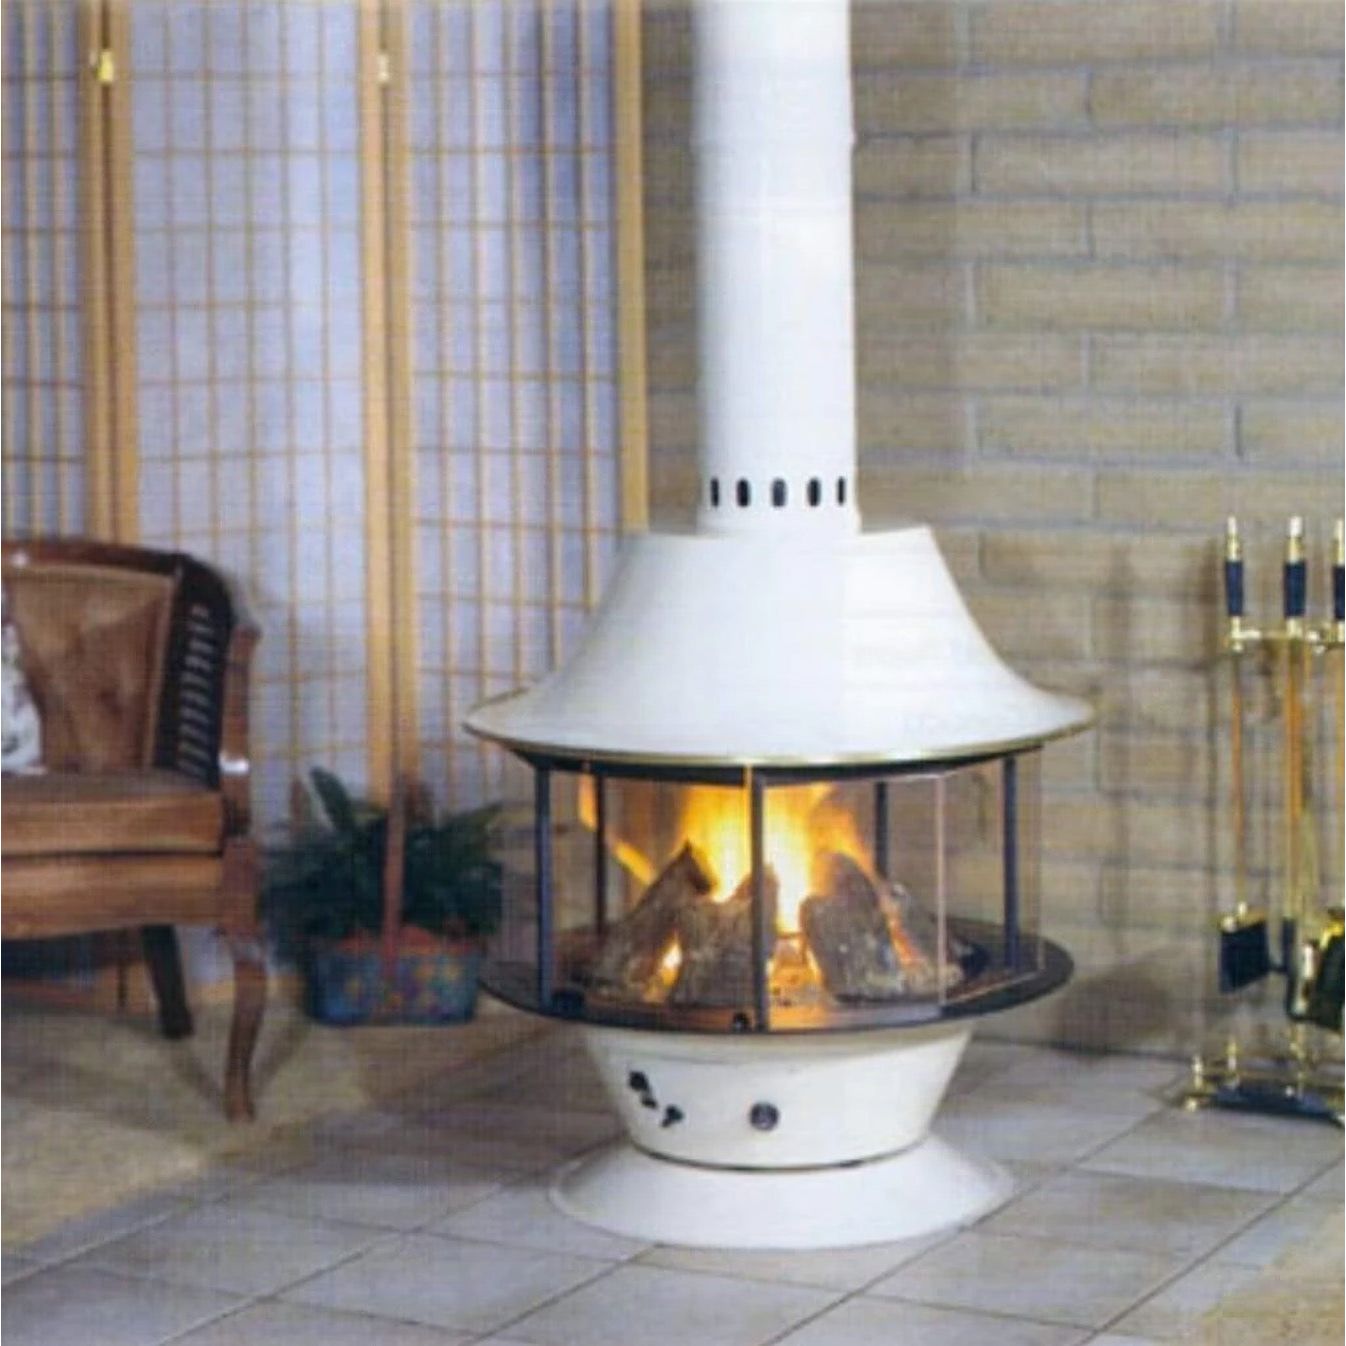 Malm 32" Spin-A-Fire Freestanding Wood Burning Fireplace